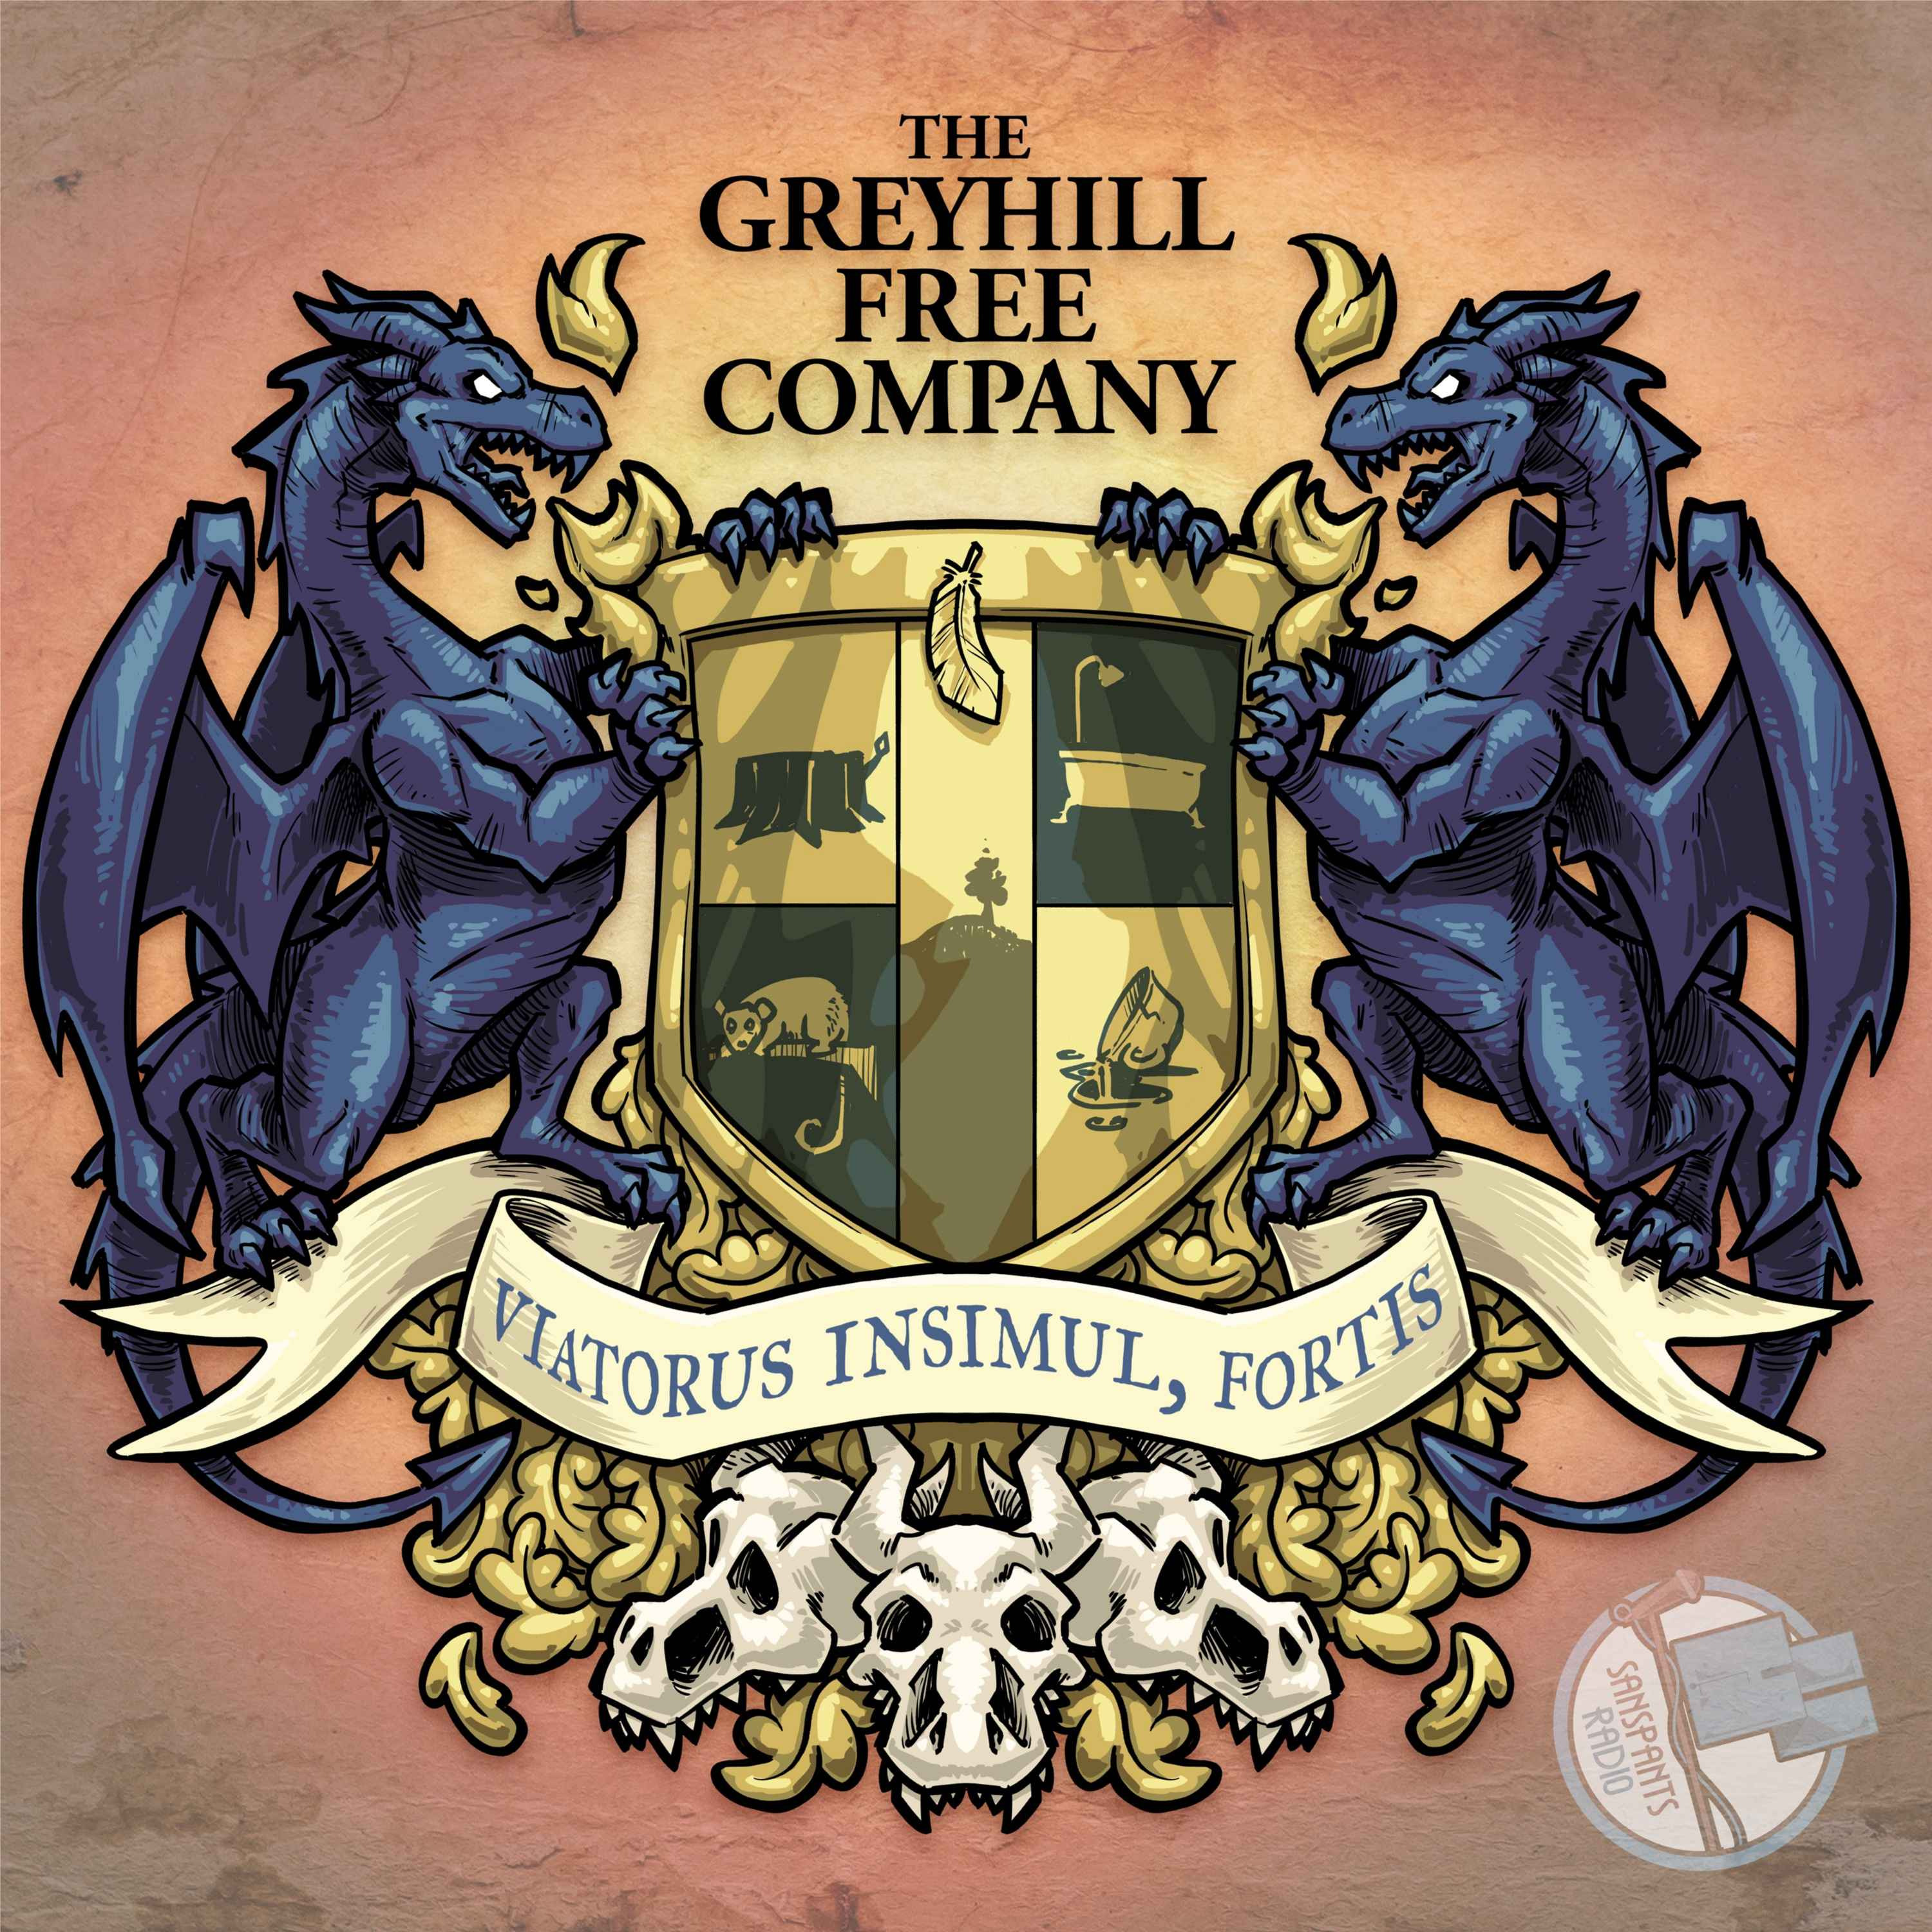 Stories of The Greyhill Free Company II #17 Experimenting with Head